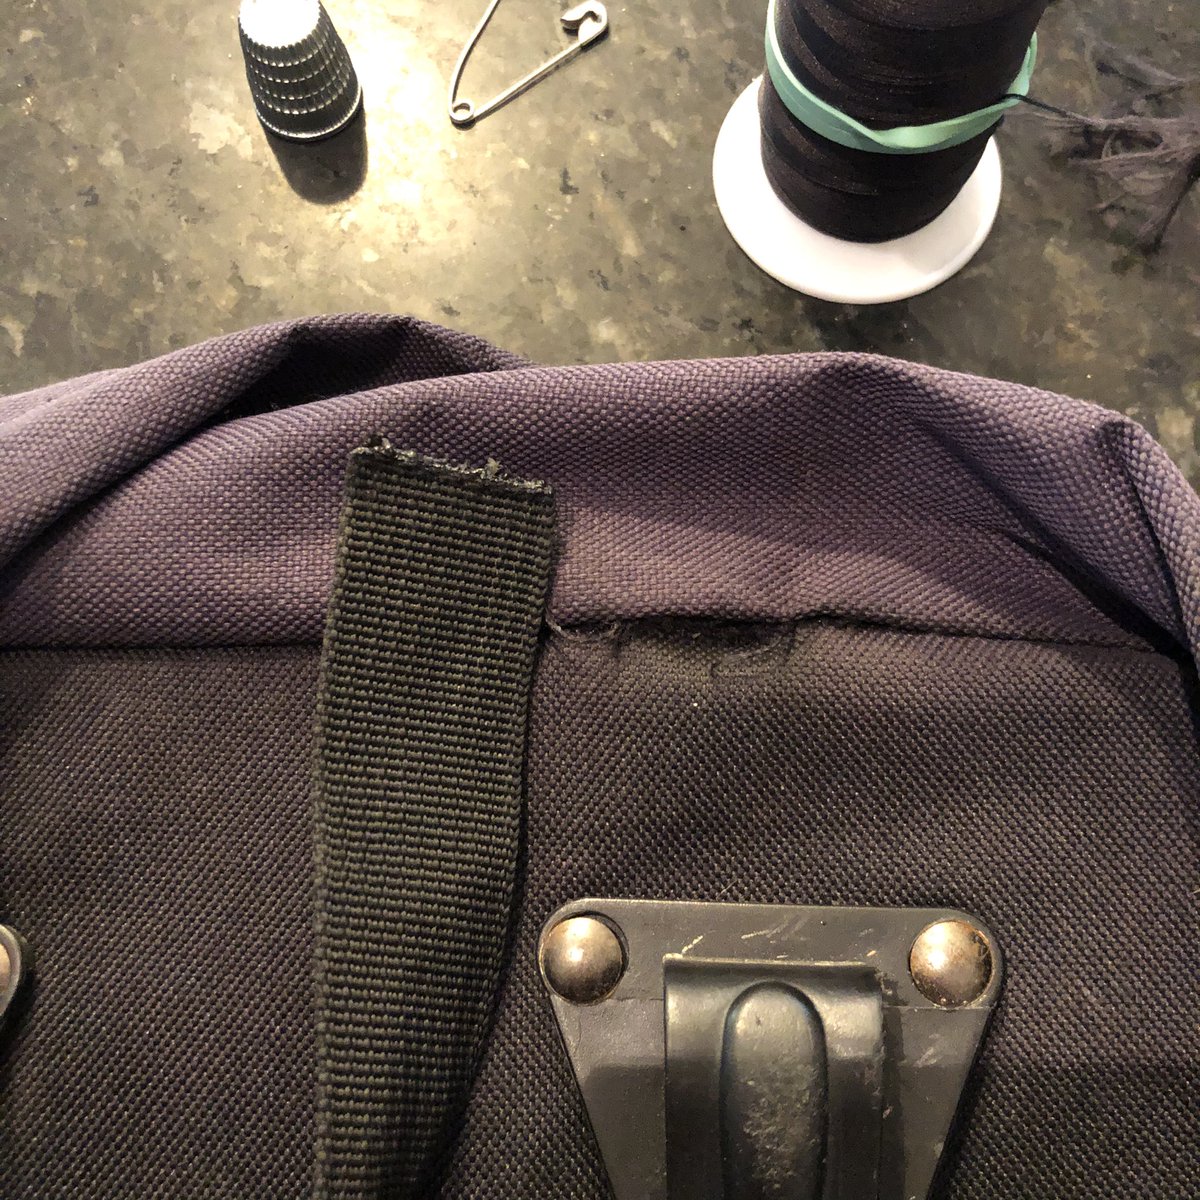 The last indignity was when the strap on one of the bags pulled out from the seam when I jerked too hard getting it off the bike. We are going to fix that problem tonight.